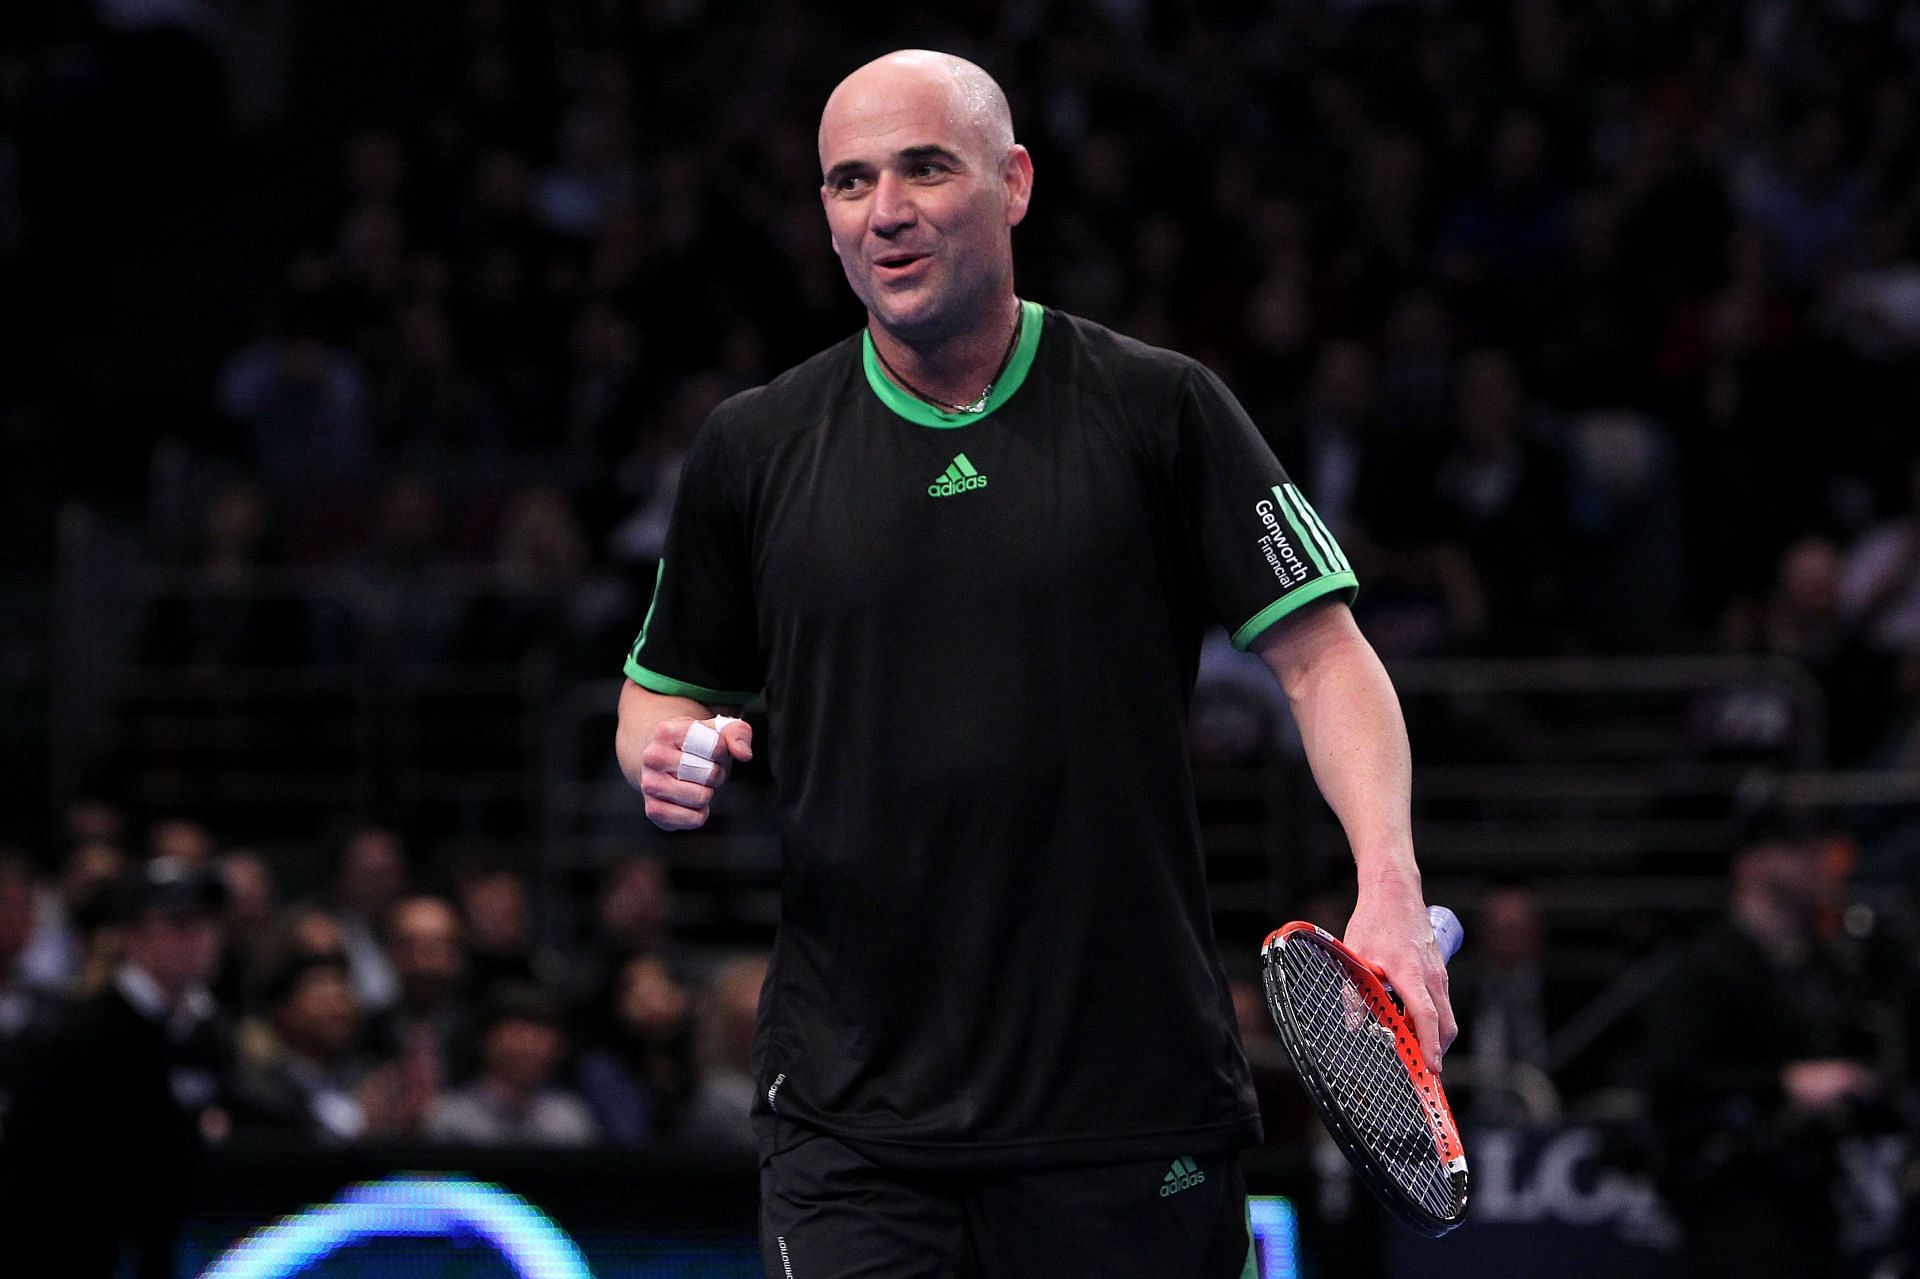 Andre Agassi during an exhibition match against Pete Sampras